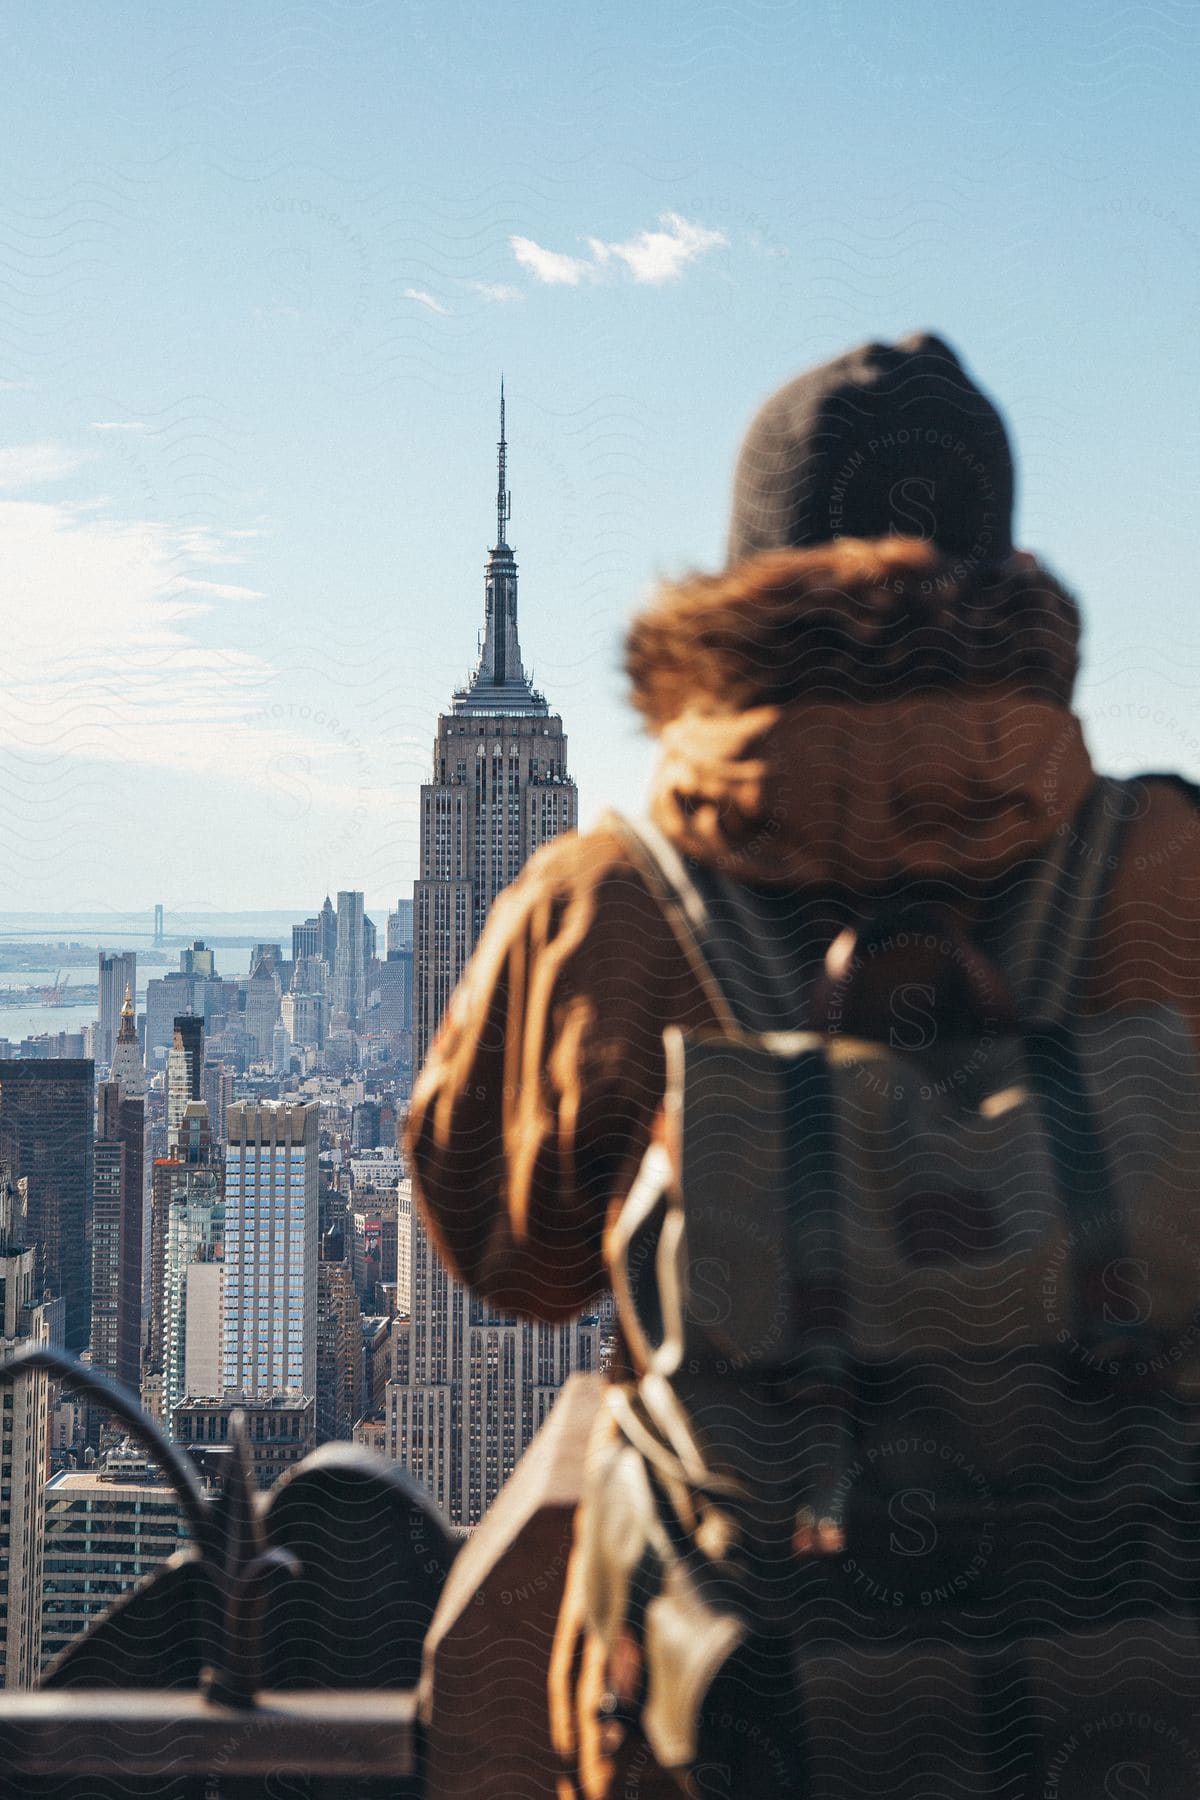 Person wearing backpack stands looking at the city surrounding the Empire State Building.